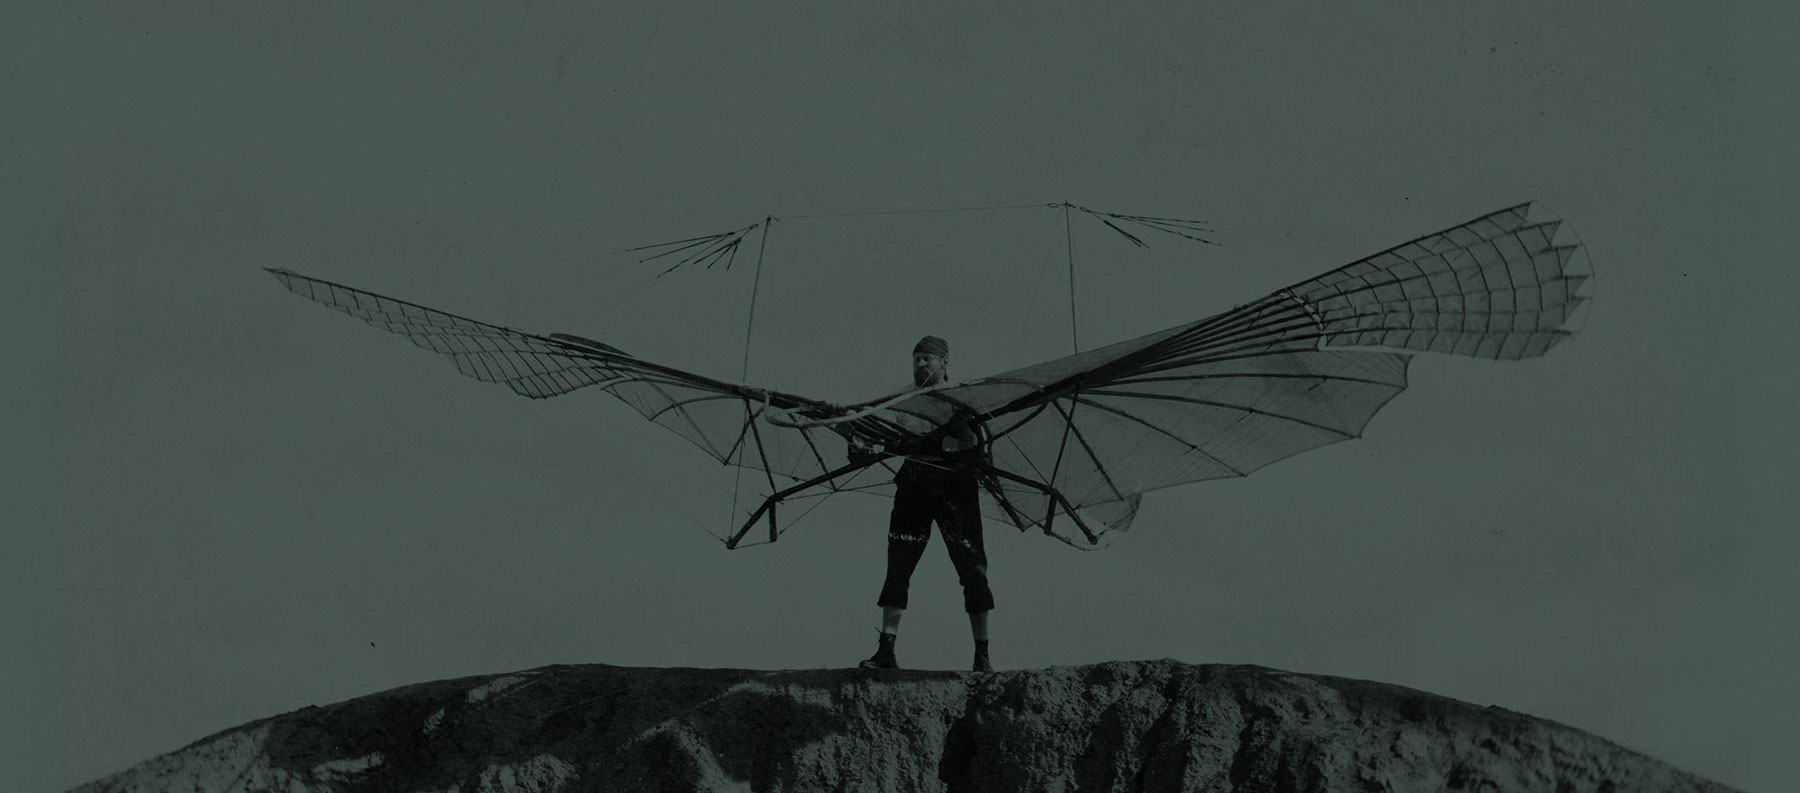 Otto-Lilienthal